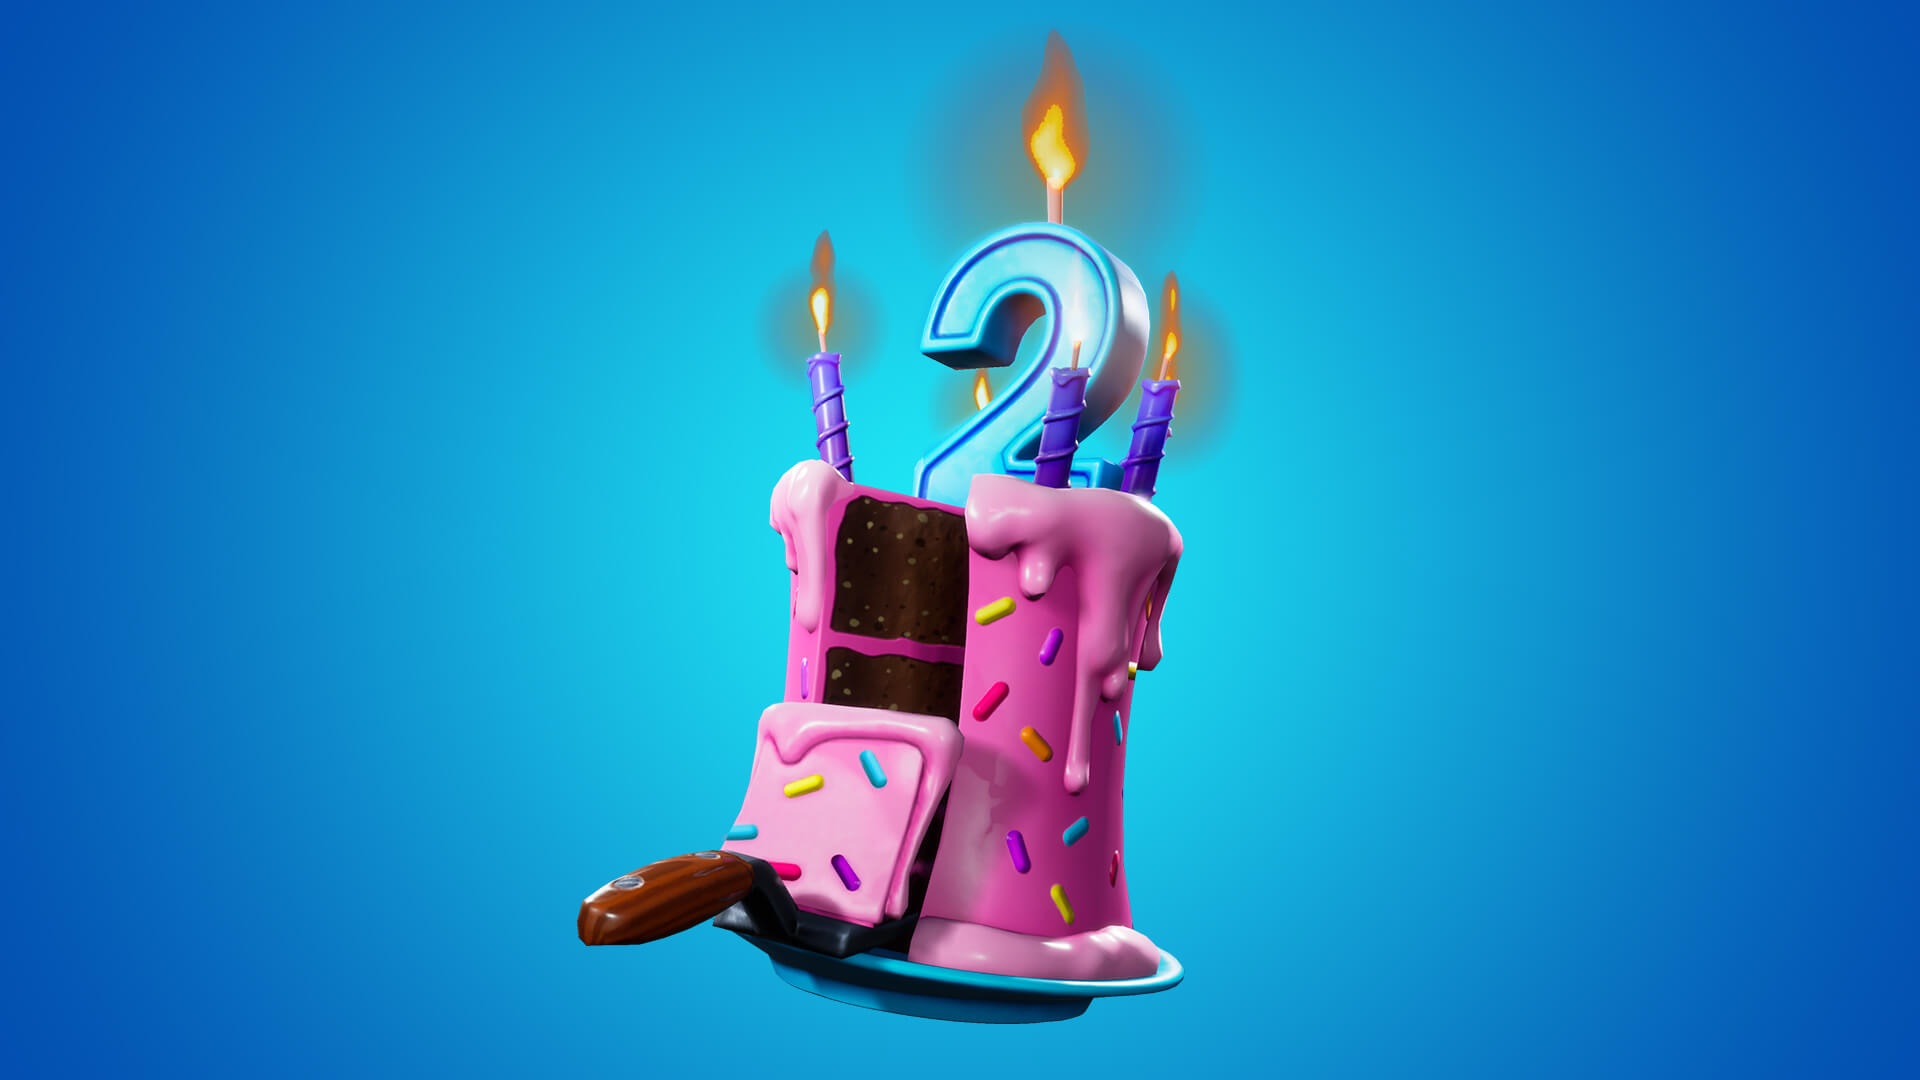 Fortnite Birthday Cakes Where To Dance In Front Of Different Birthday Cakes In Fortnite Pcgamesn